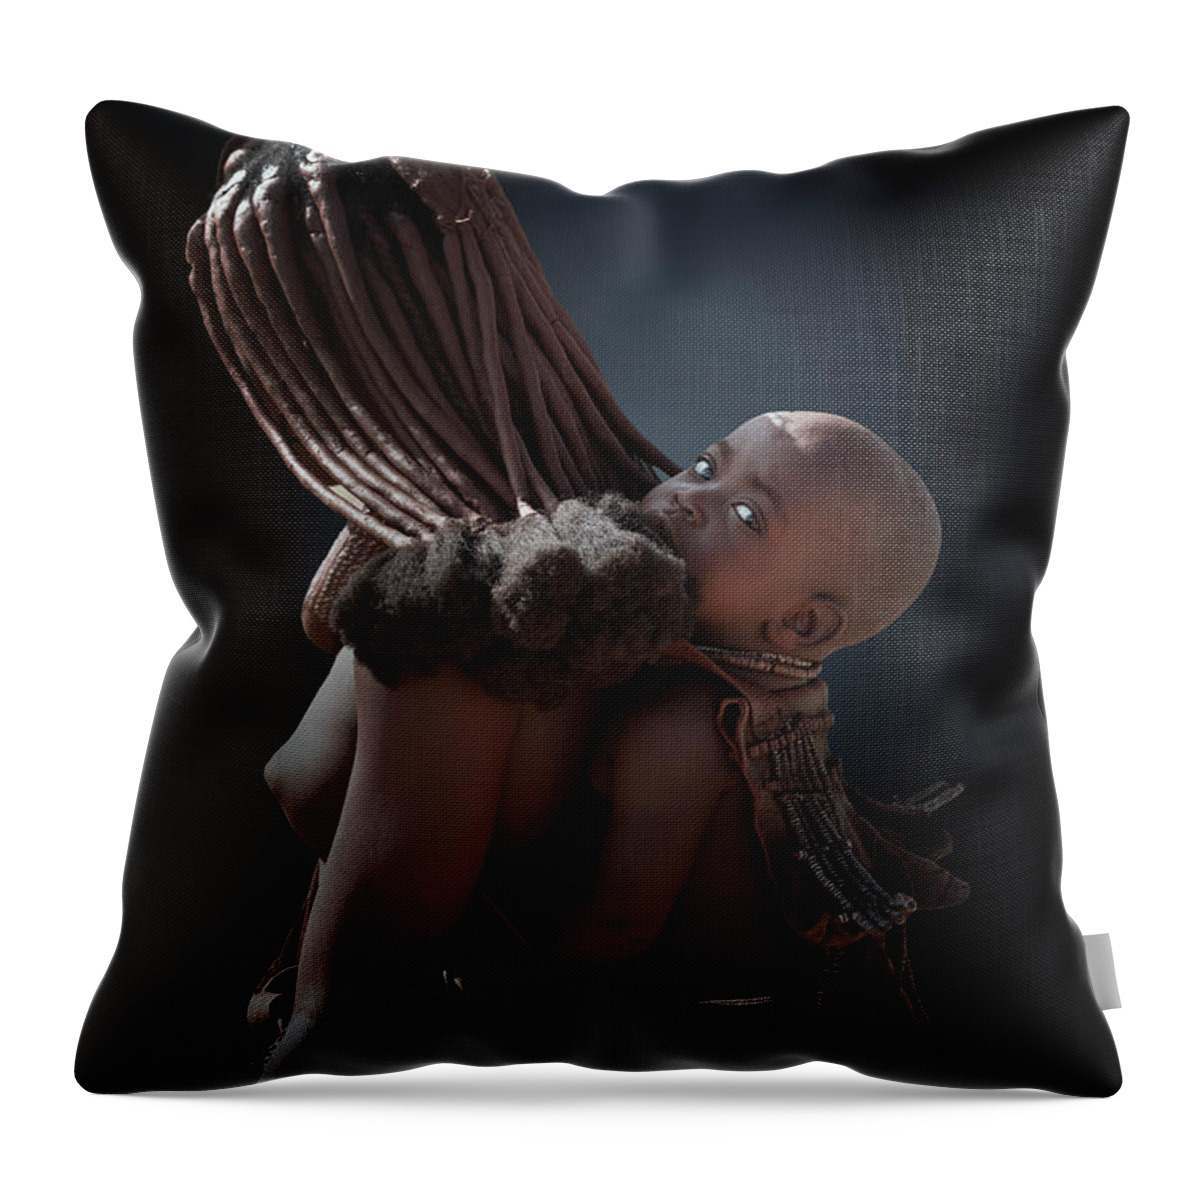 People Throw Pillow featuring the photograph Himba Mother With Her Little Child by Buena Vista Images